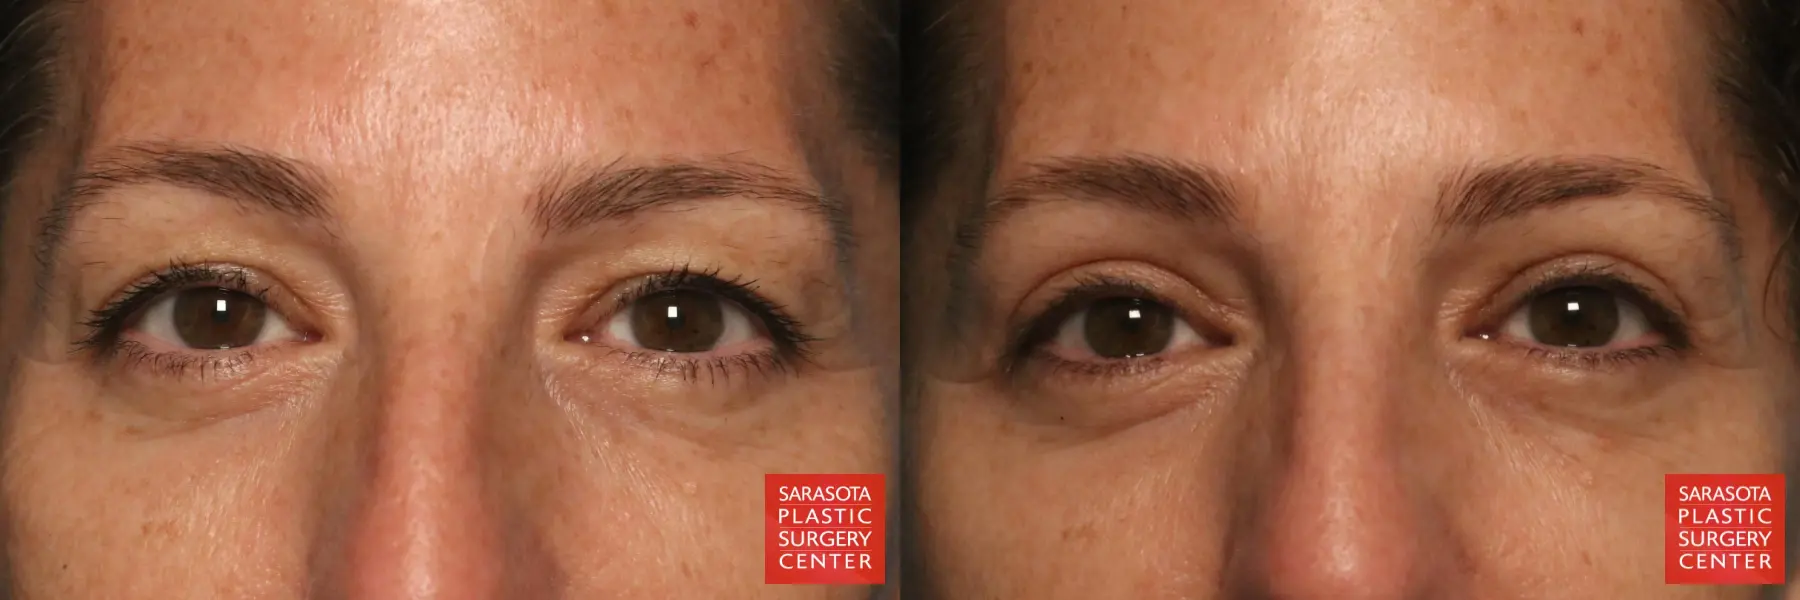 Eyelid Surgery: Patient 23 - Before and After  